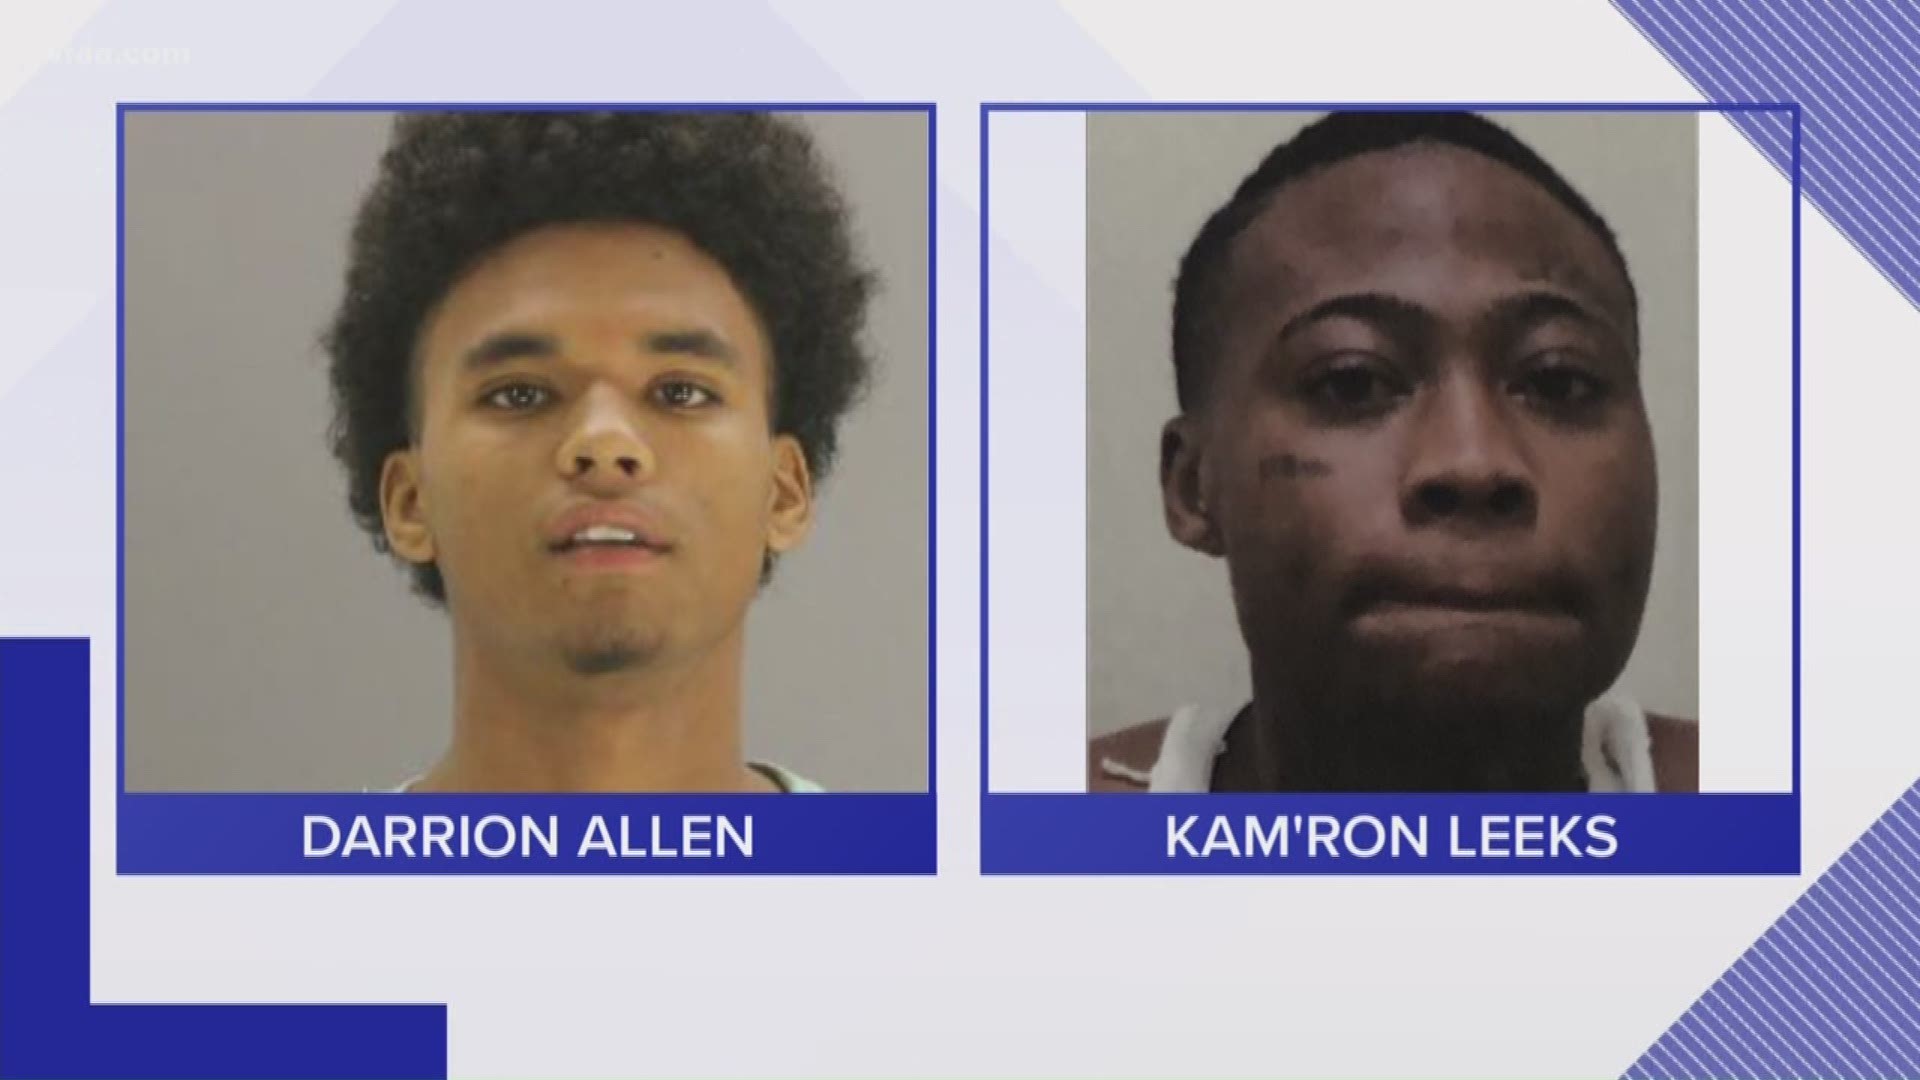 According to Dallas police, around 9 p.m. on Jan. 2, Darrion Allen, 19 and Kam’Ron Leeks, 17, shot and killed 47-year-old Anthony Lee Ross.